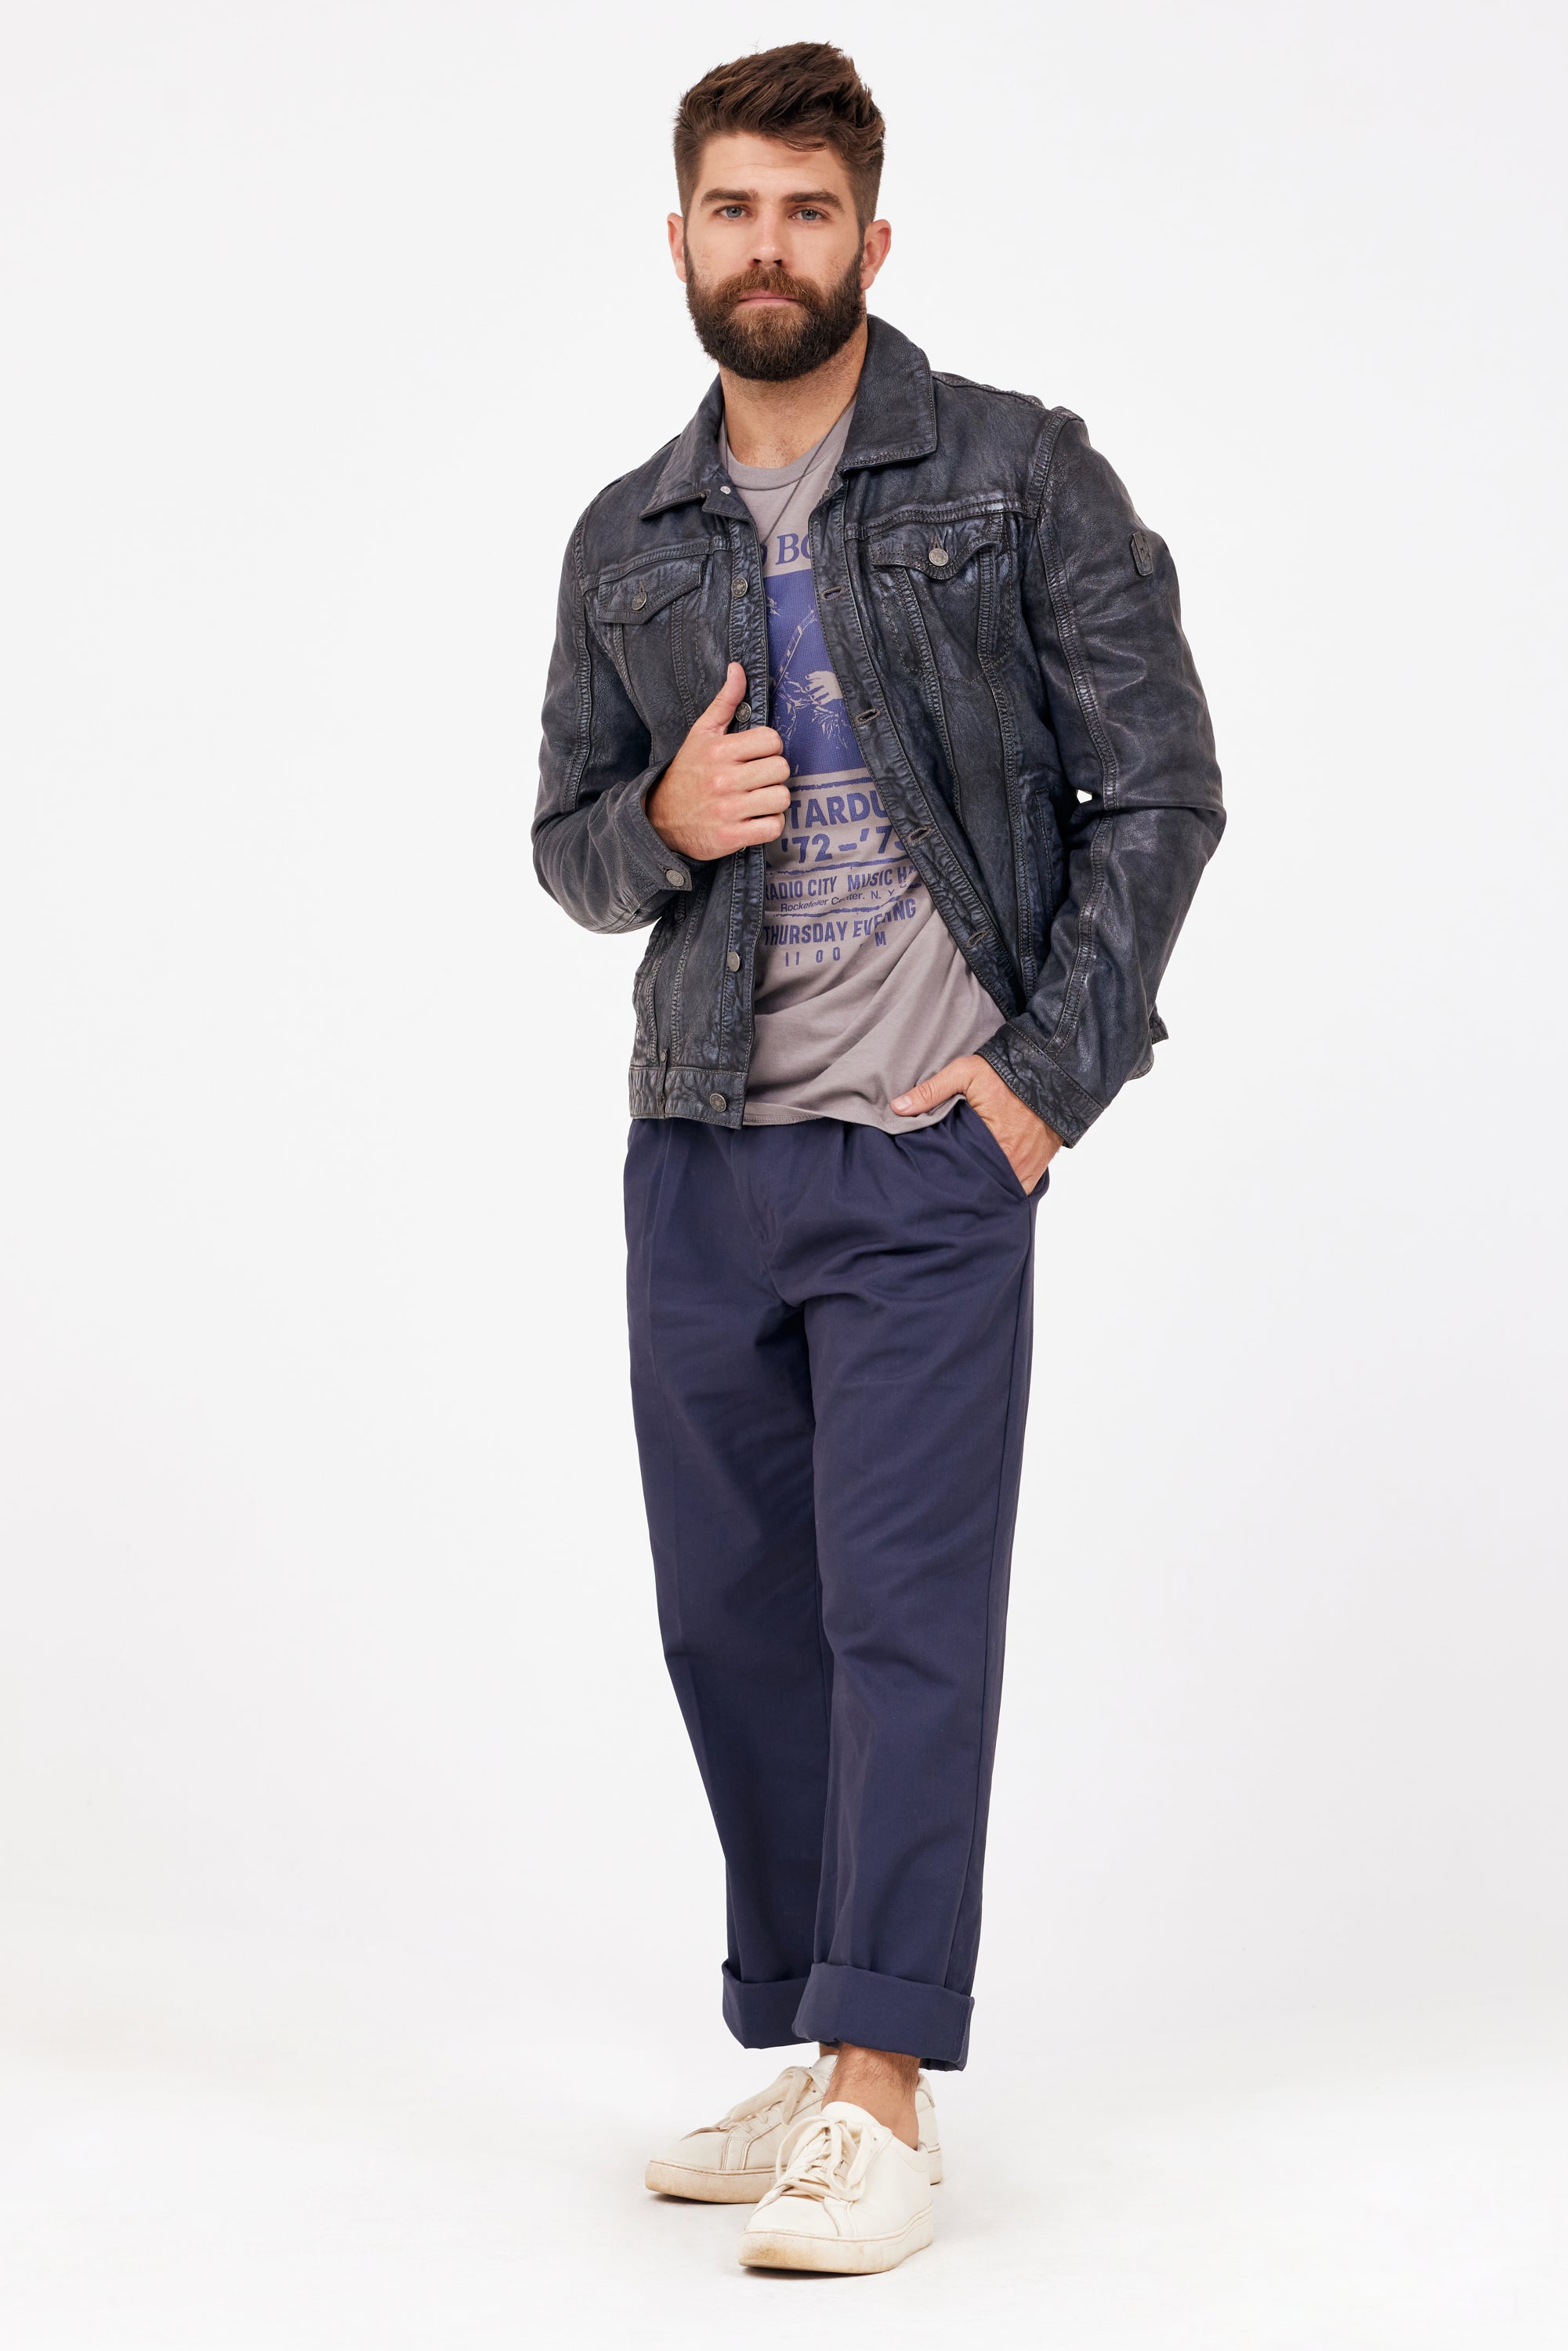 Geoff RF mauritiusleather Anthracite-Blue – Leather Jacket